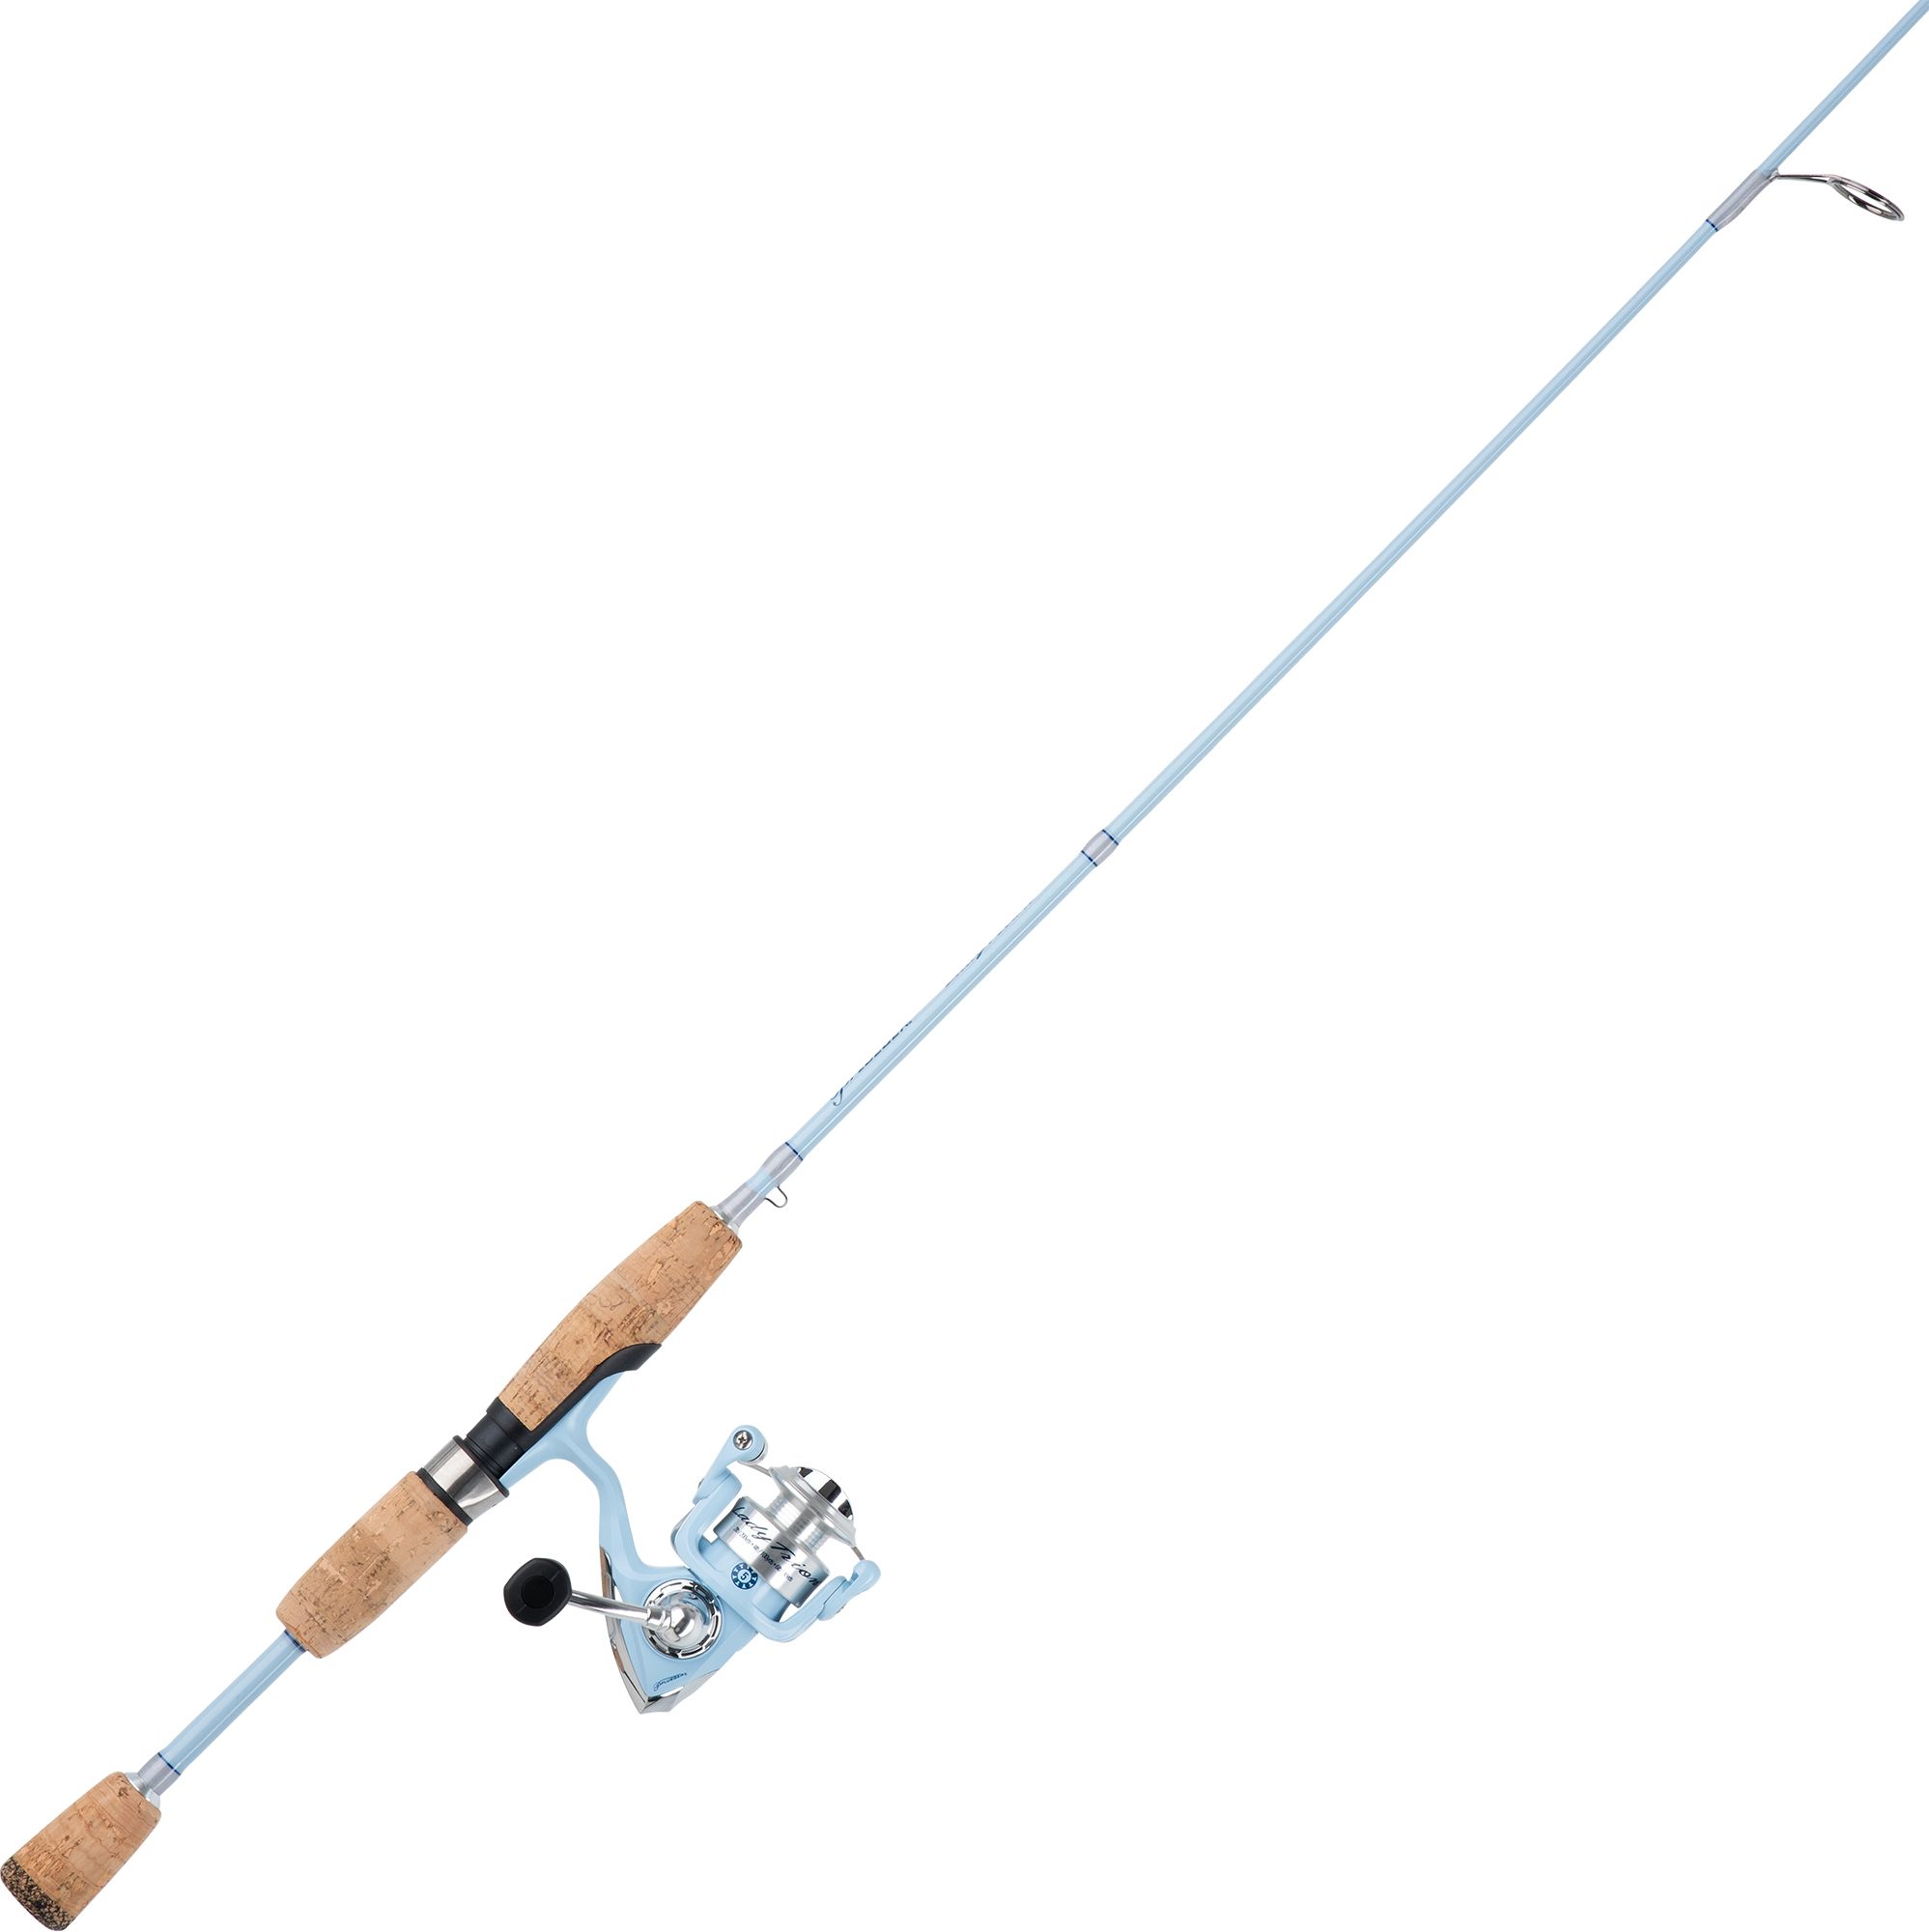 Dick's Sporting Goods Pflueger Lady Trion Spinning Combo